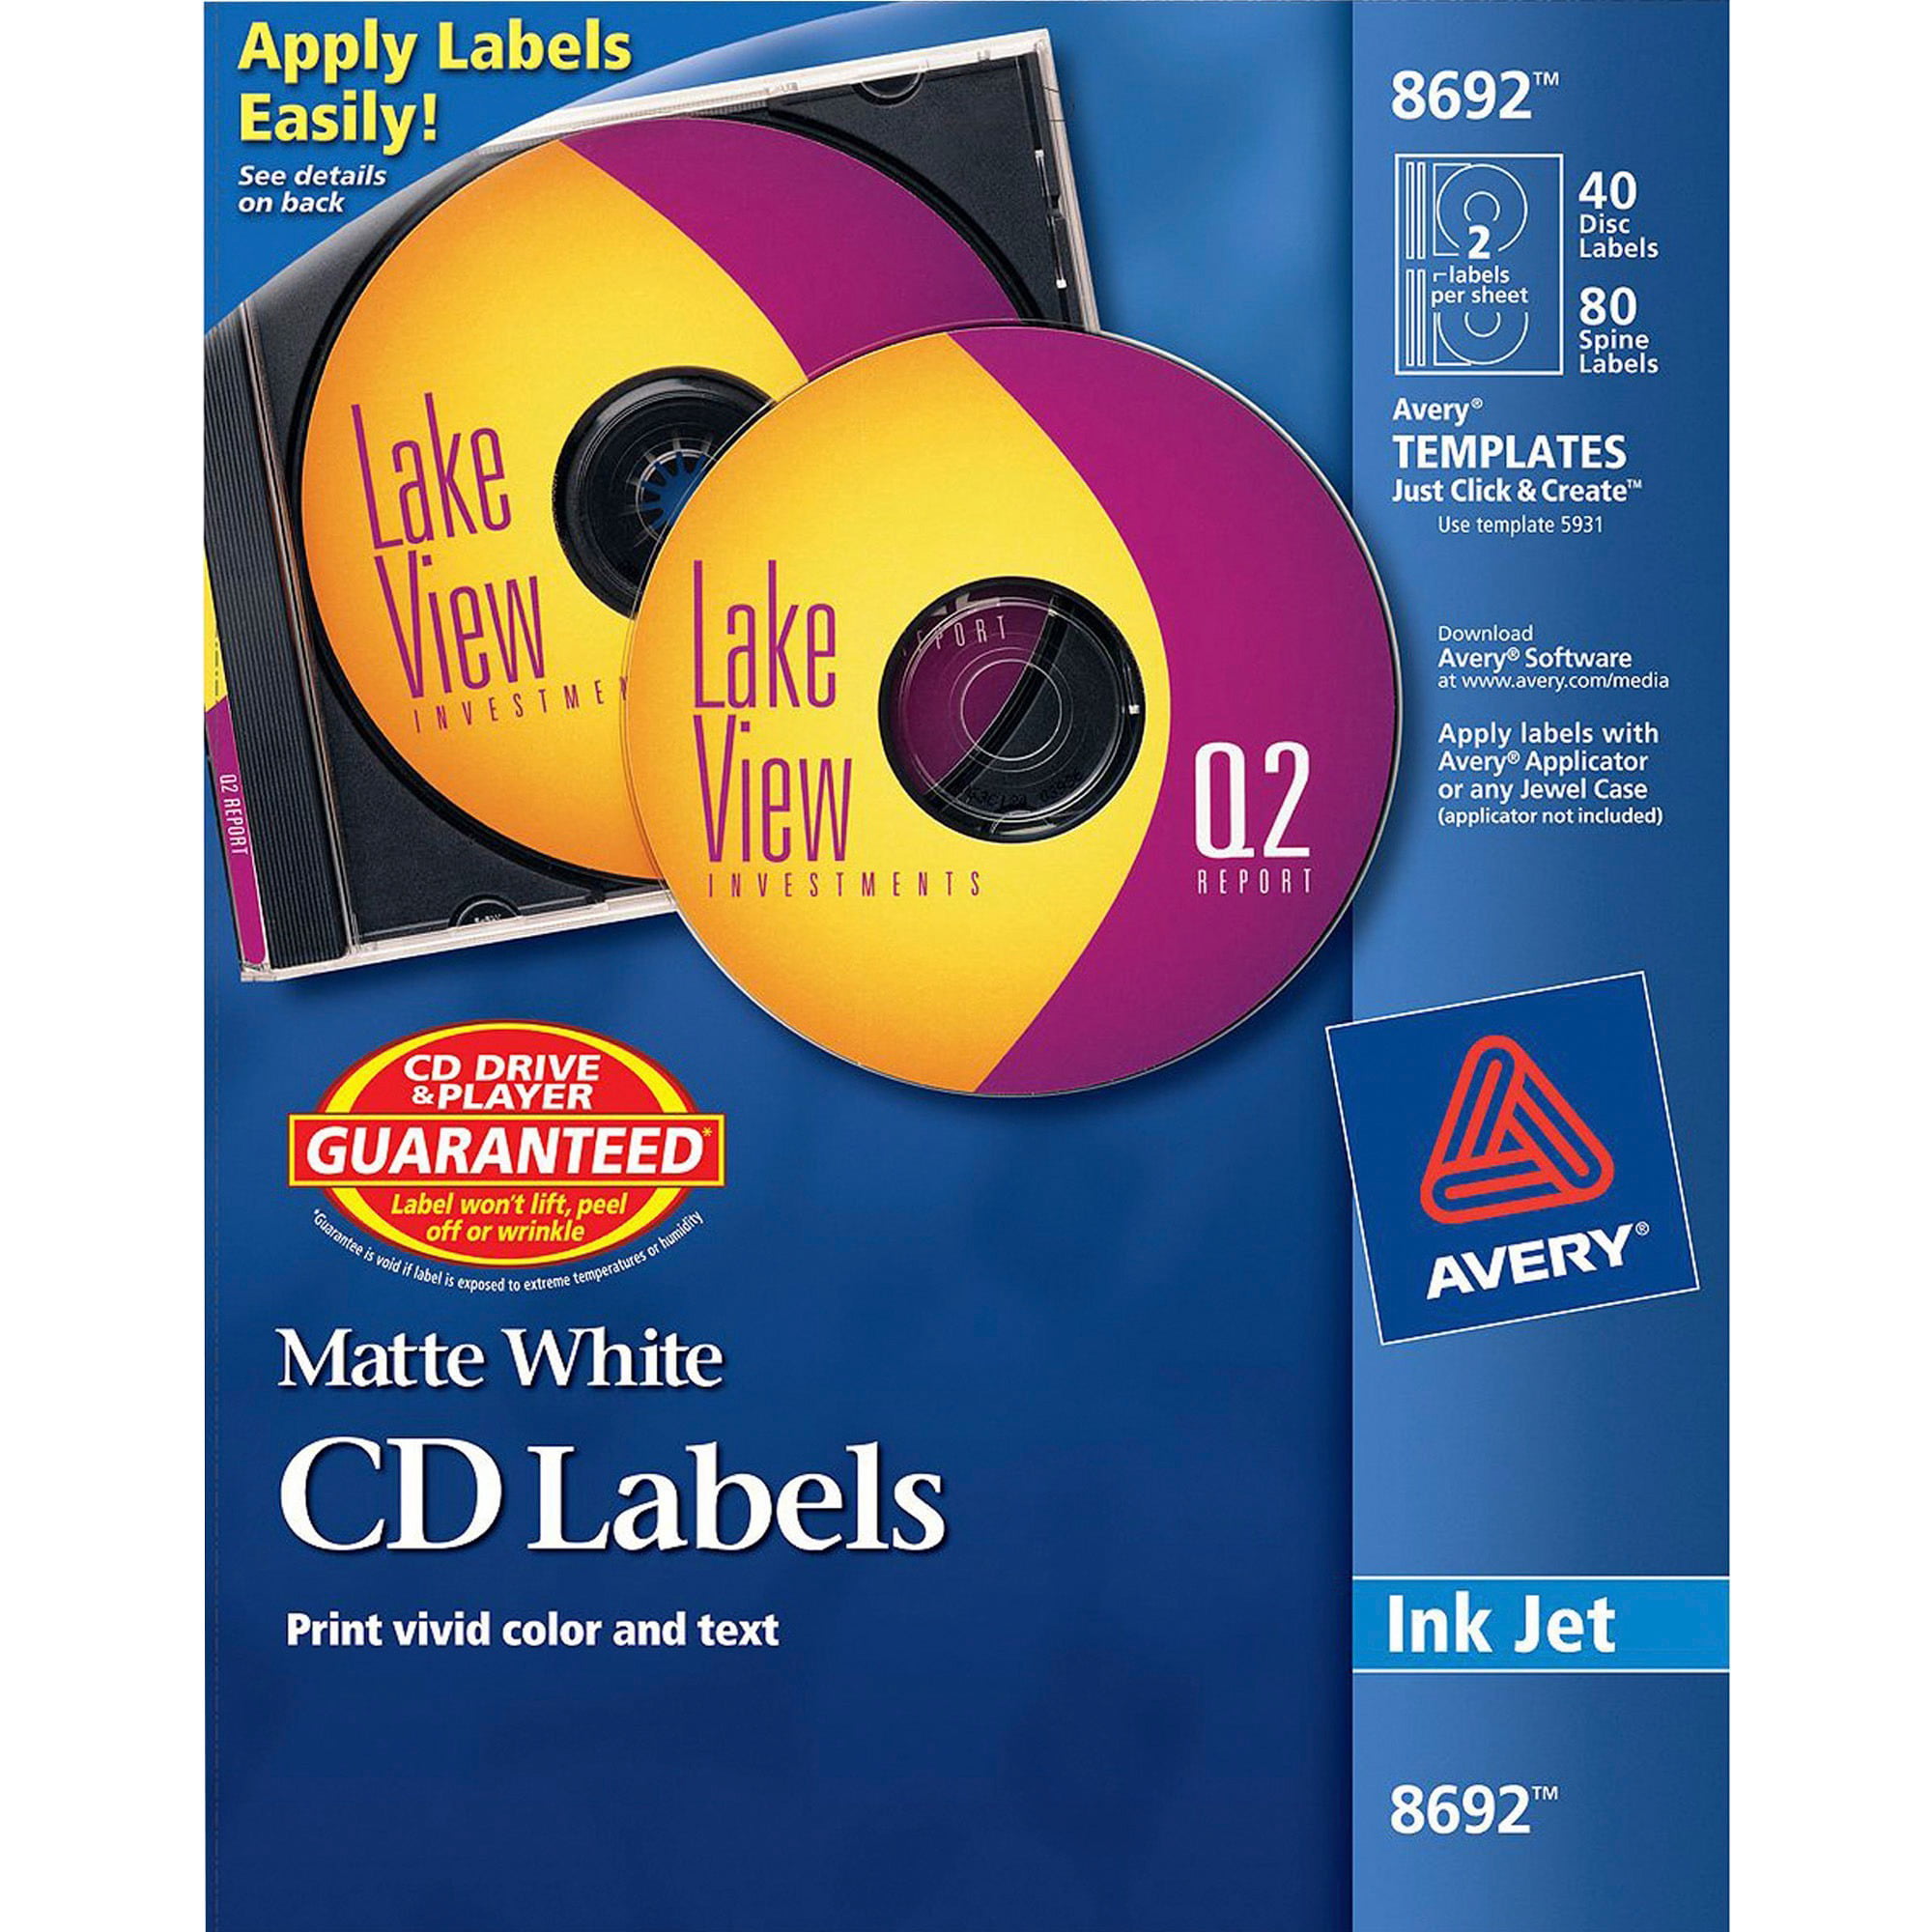 Avery Label 8692 Template Word